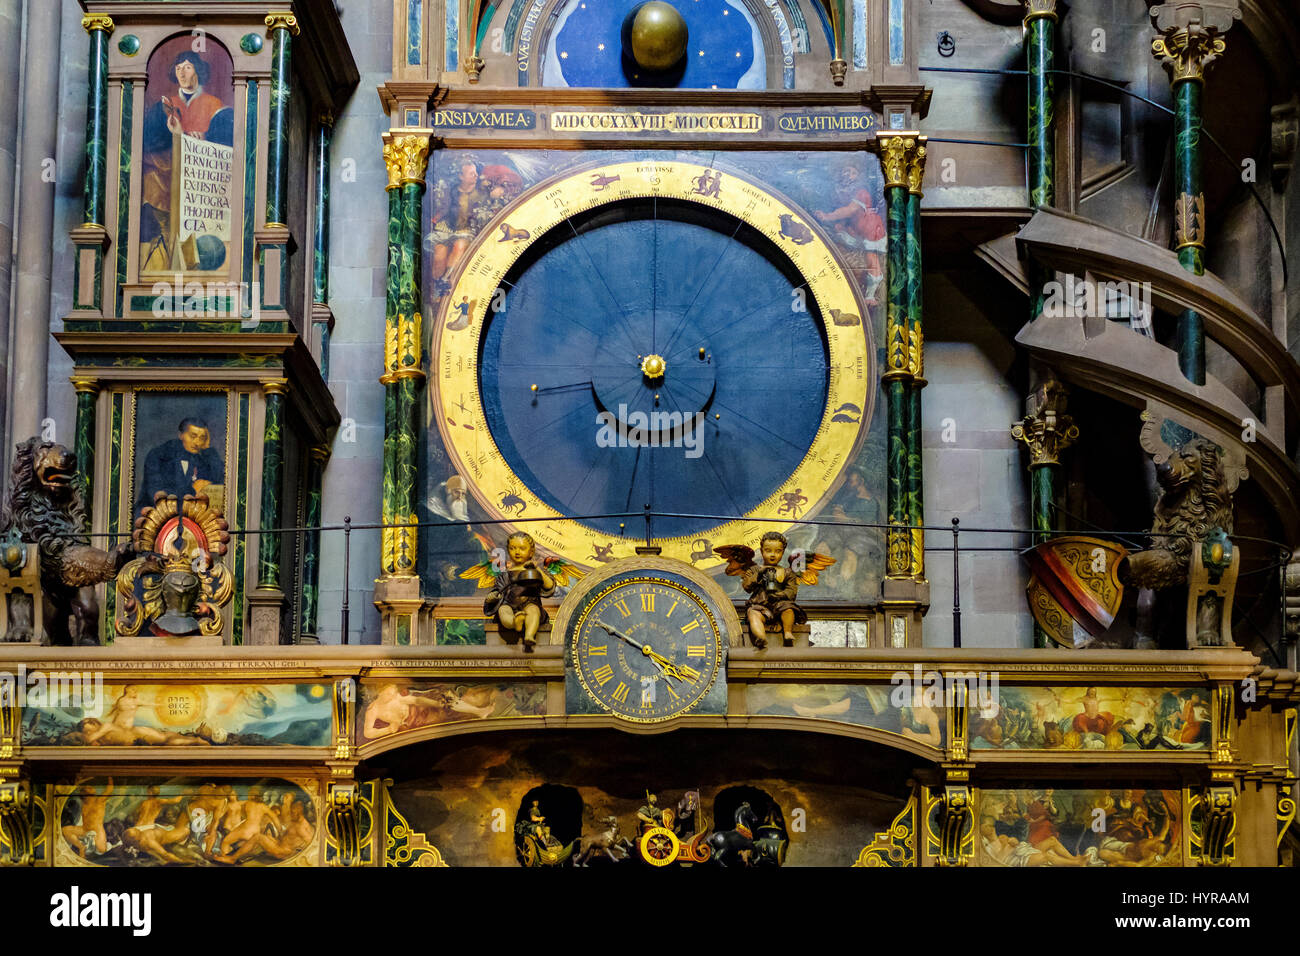 Astronomical clock 19th century, orrery, heliocentric planetary dial, Notre-Dame cathedral, Strasbourg, Alsace, France, Europe, Stock Photo